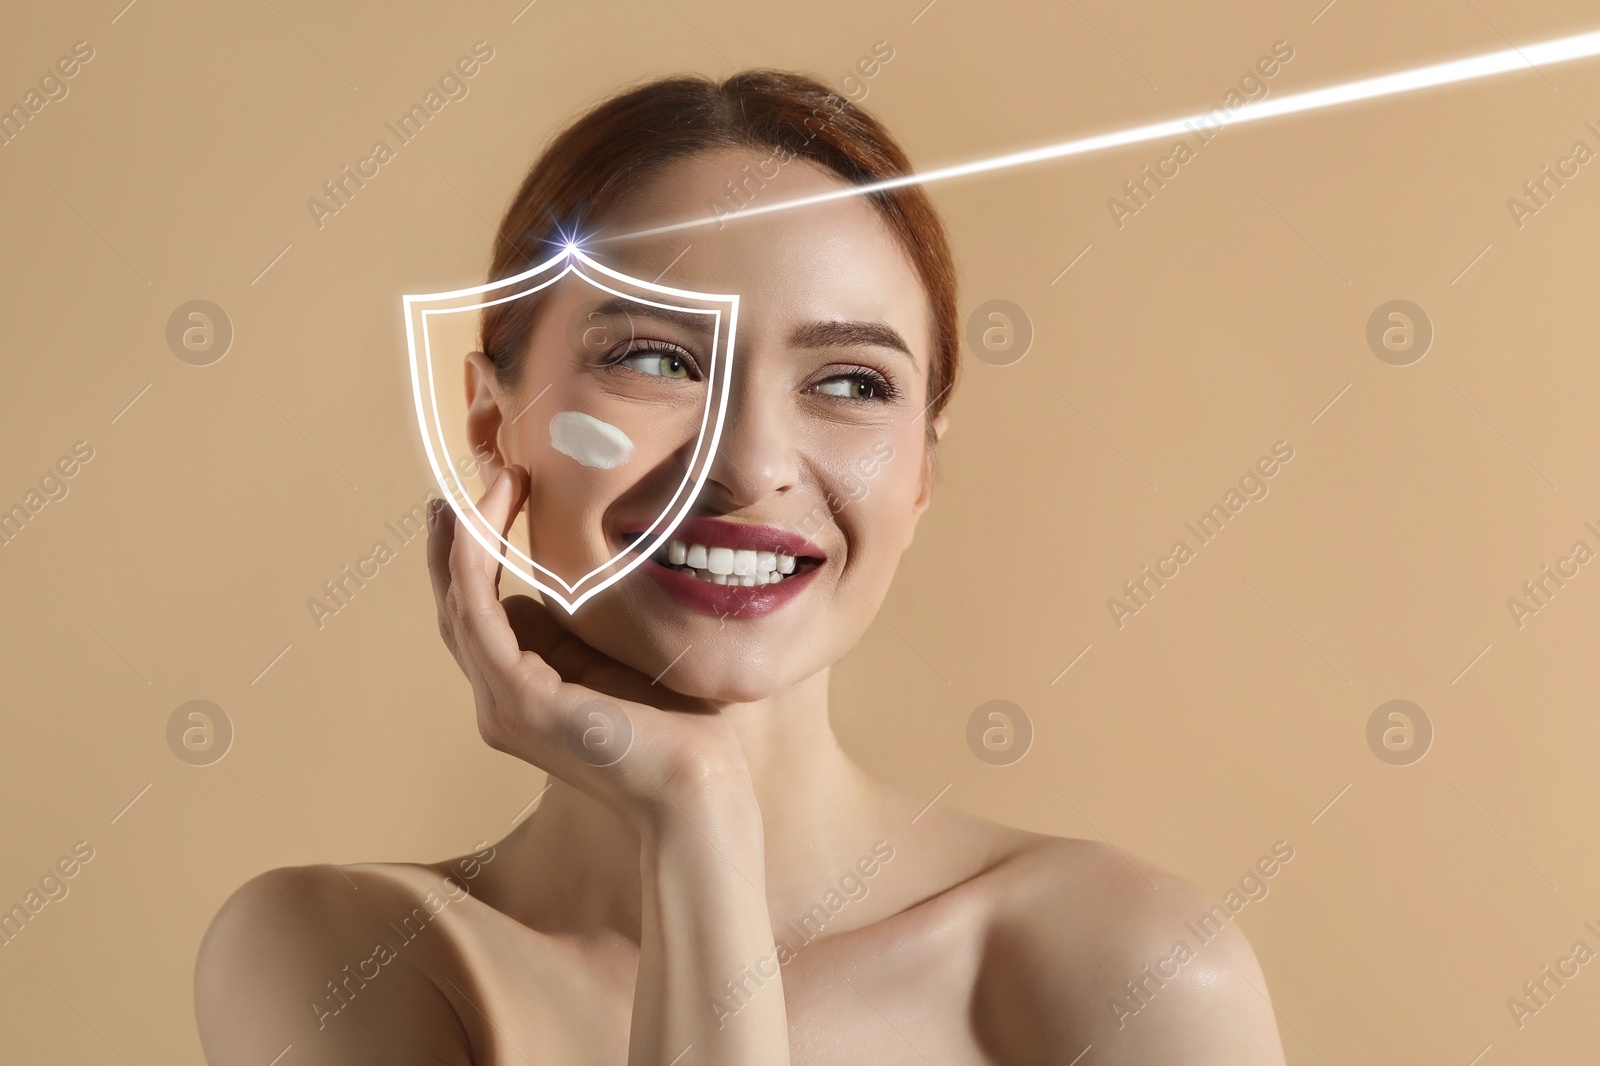 Image of Sun protection care. Beautiful woman with sunscreen on face against beige background. Illustration of shield as SPF